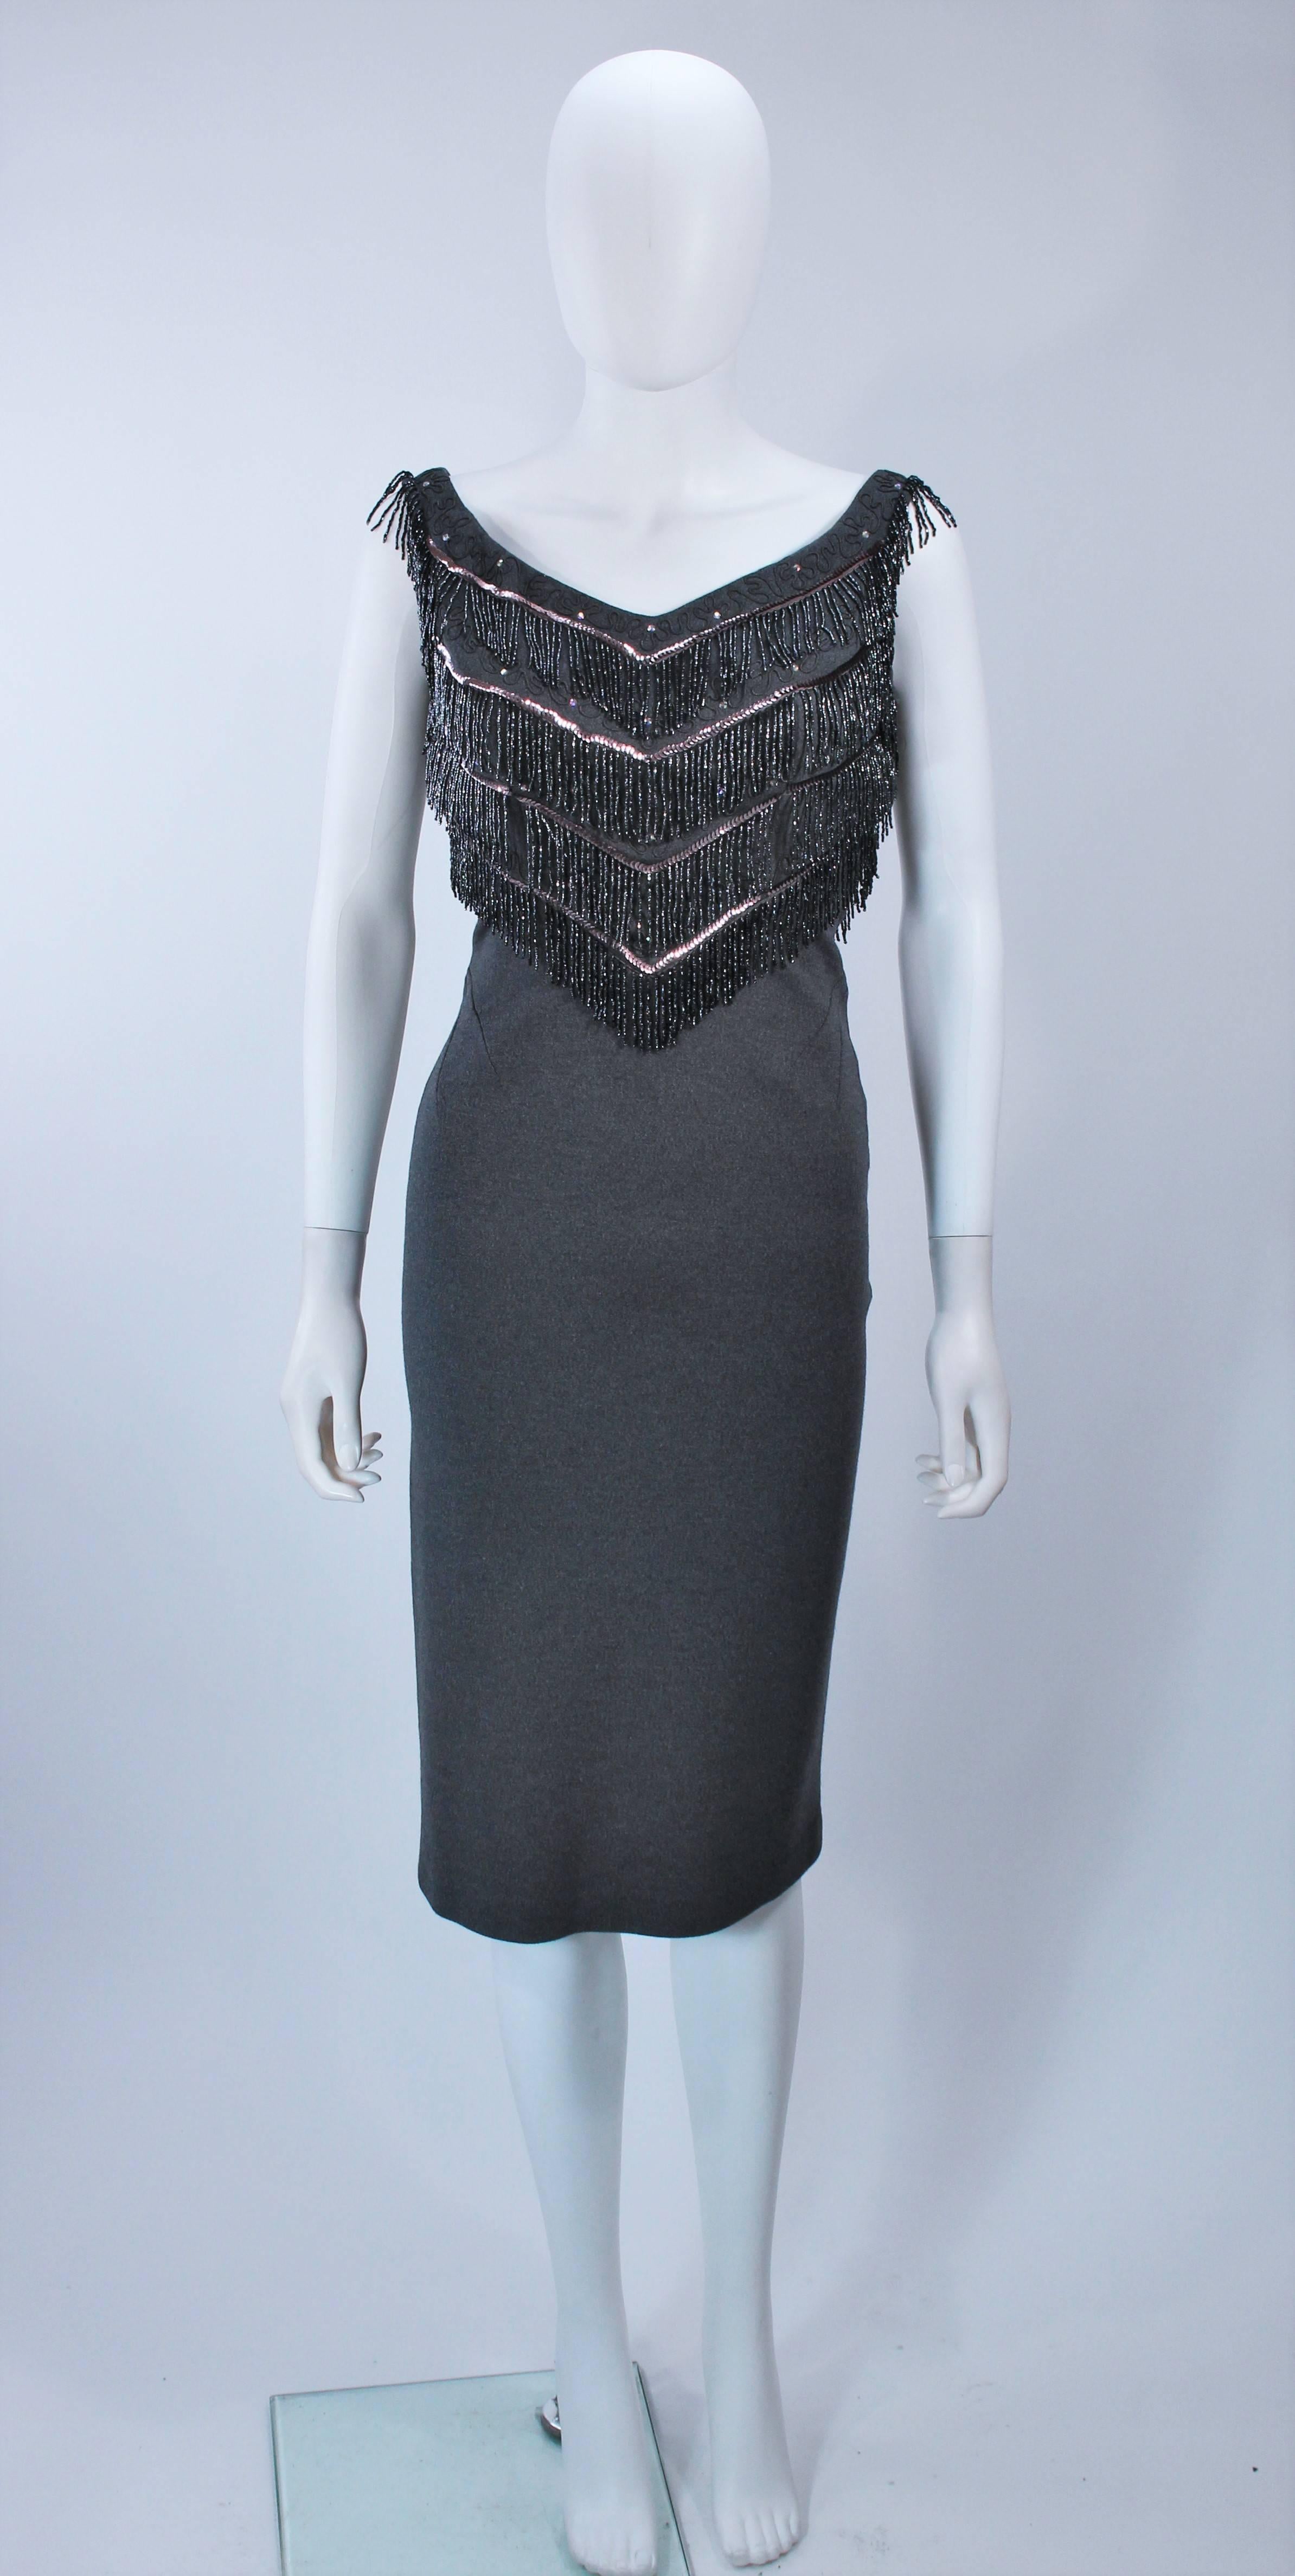  This Sydney North cocktail dress is composed of a stretch grey knit wool with metallic beaded trim. There is a center back zipper closure. In excellent vintage condition. 

**Please cross-reference measurements for personal accuracy. Size in